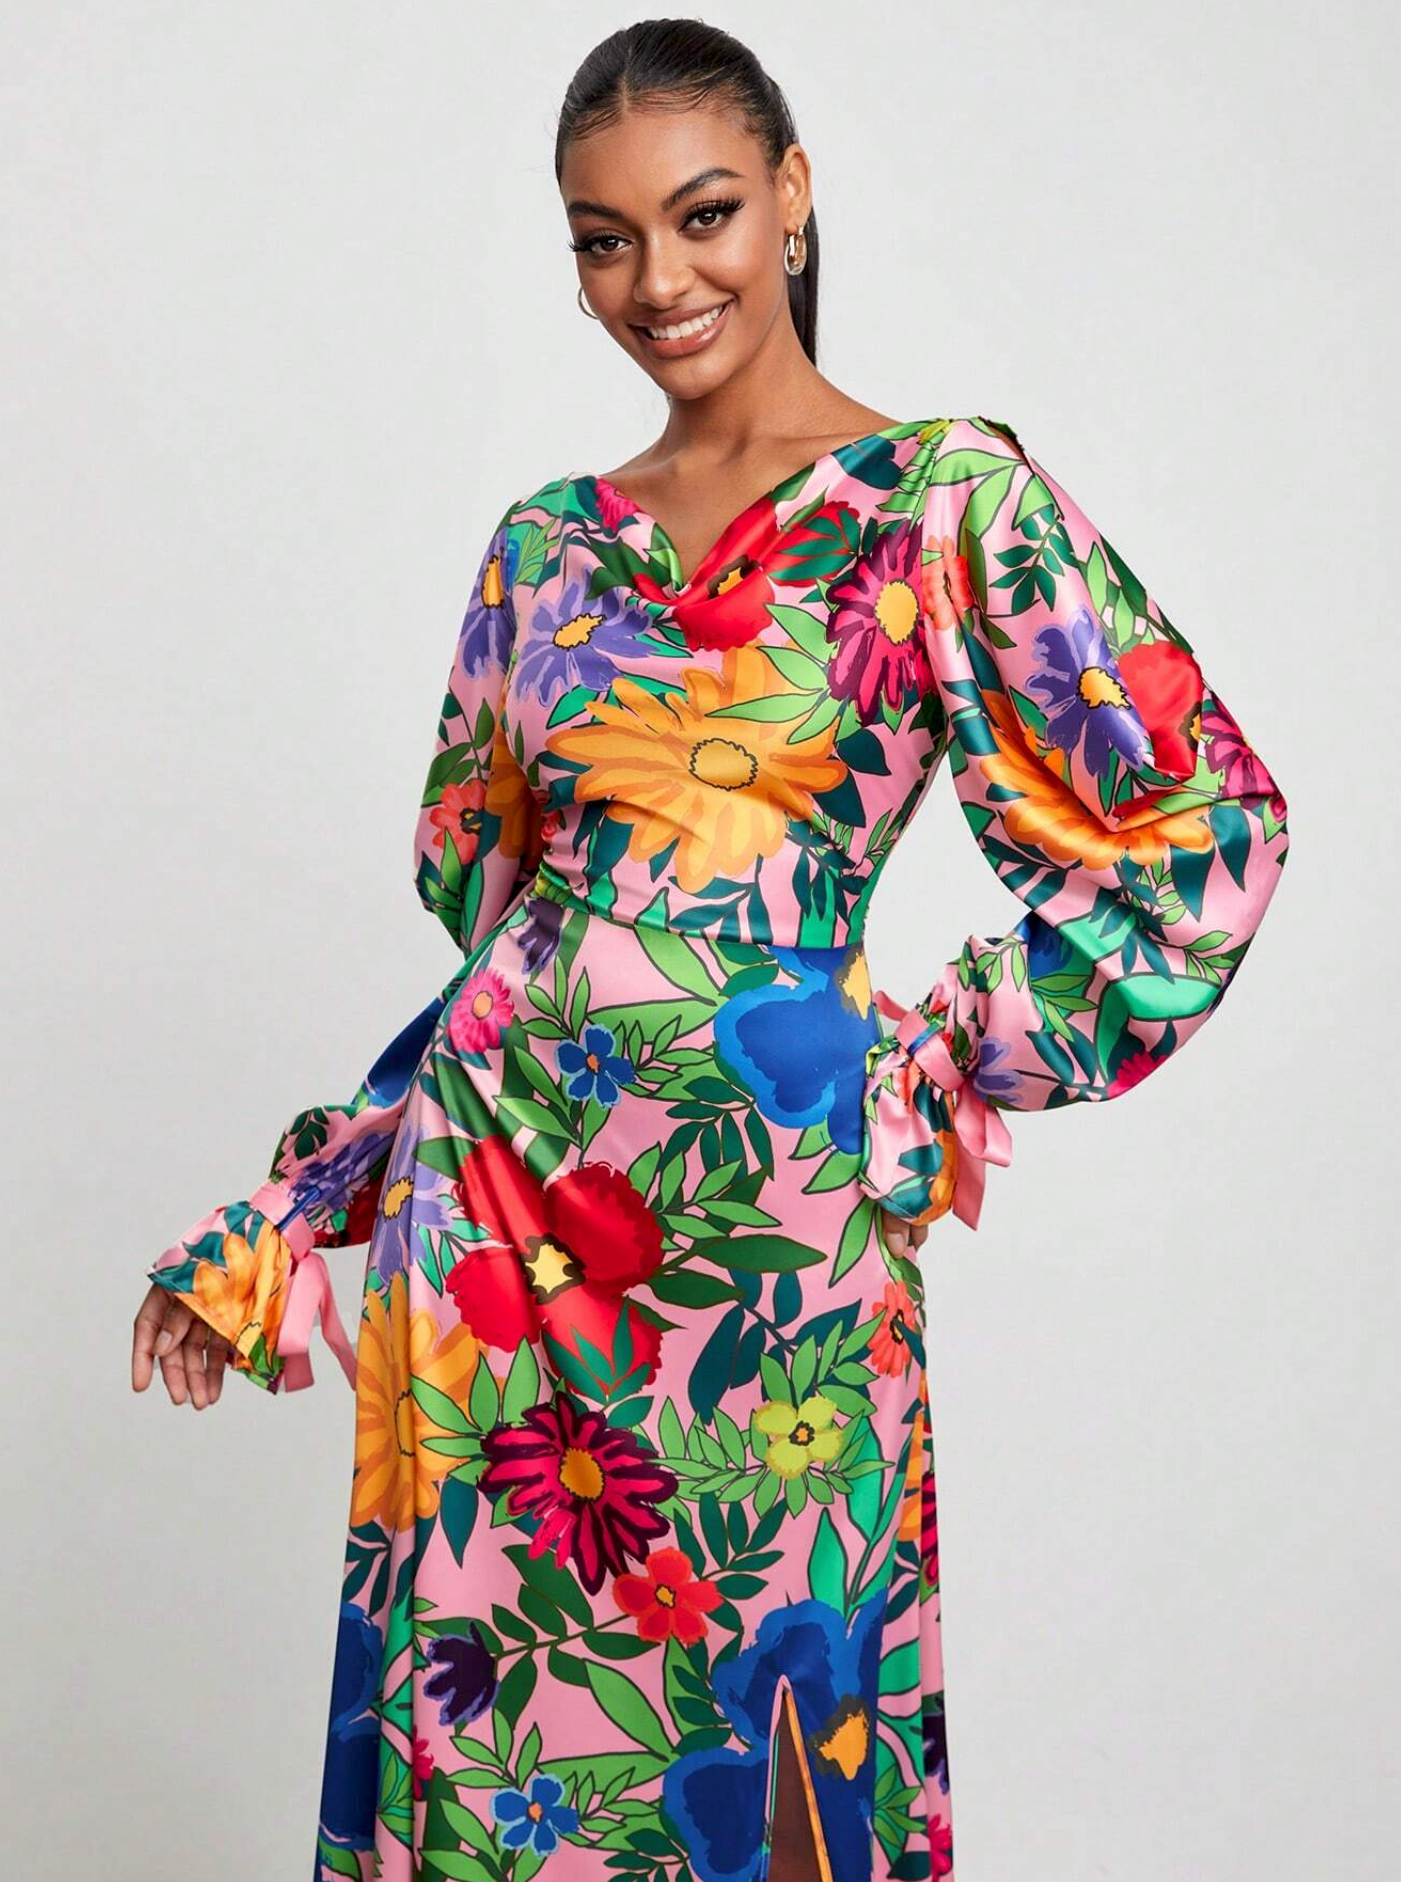 BELANGE HANDMADE X SHEIN - Floral Print Flare Sleeve Split Thigh Dress - Available on SHEIN.COM Only